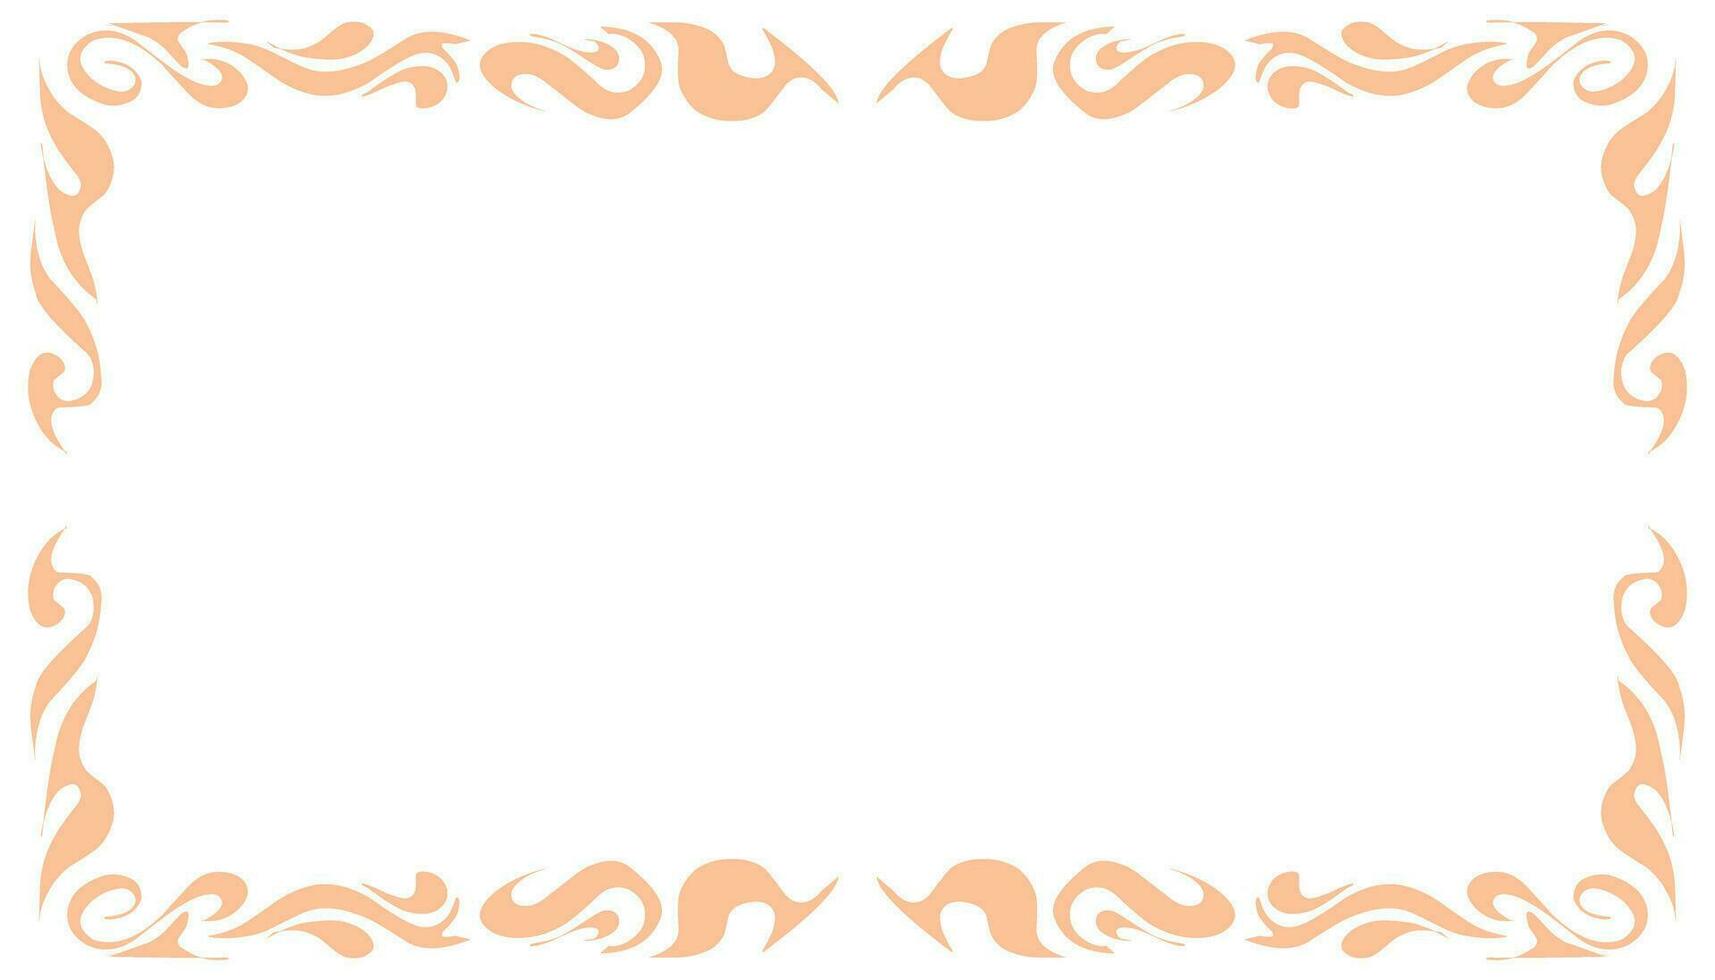 a frame with orange and white swirls vector